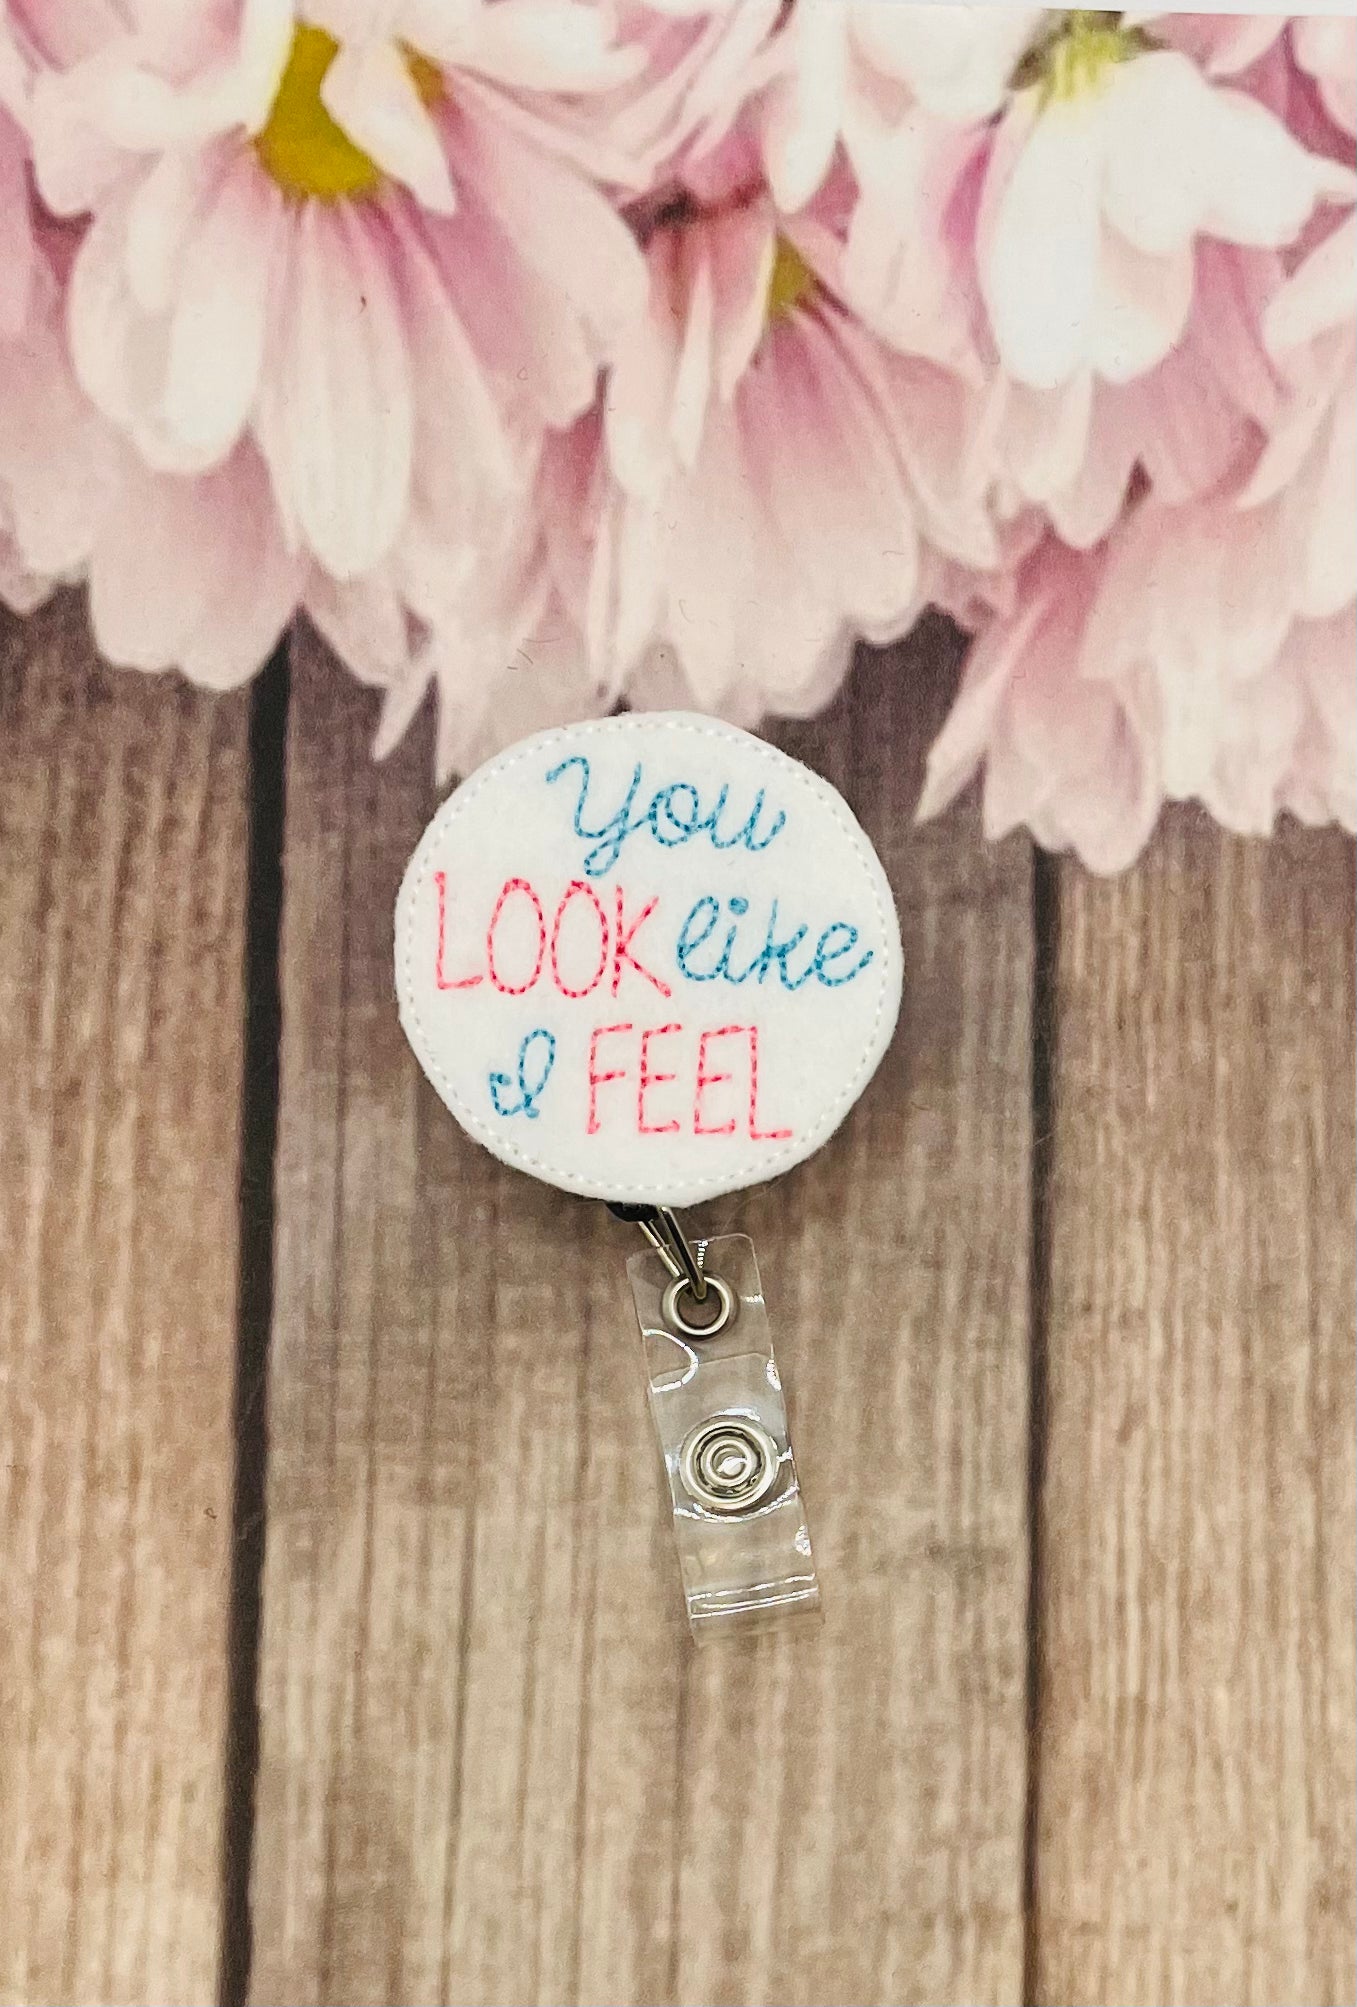 It's Fine I'm Fine Everything is Fine Funny Tangled Christmas Lights Badge  Reel ID Holder -  Norway